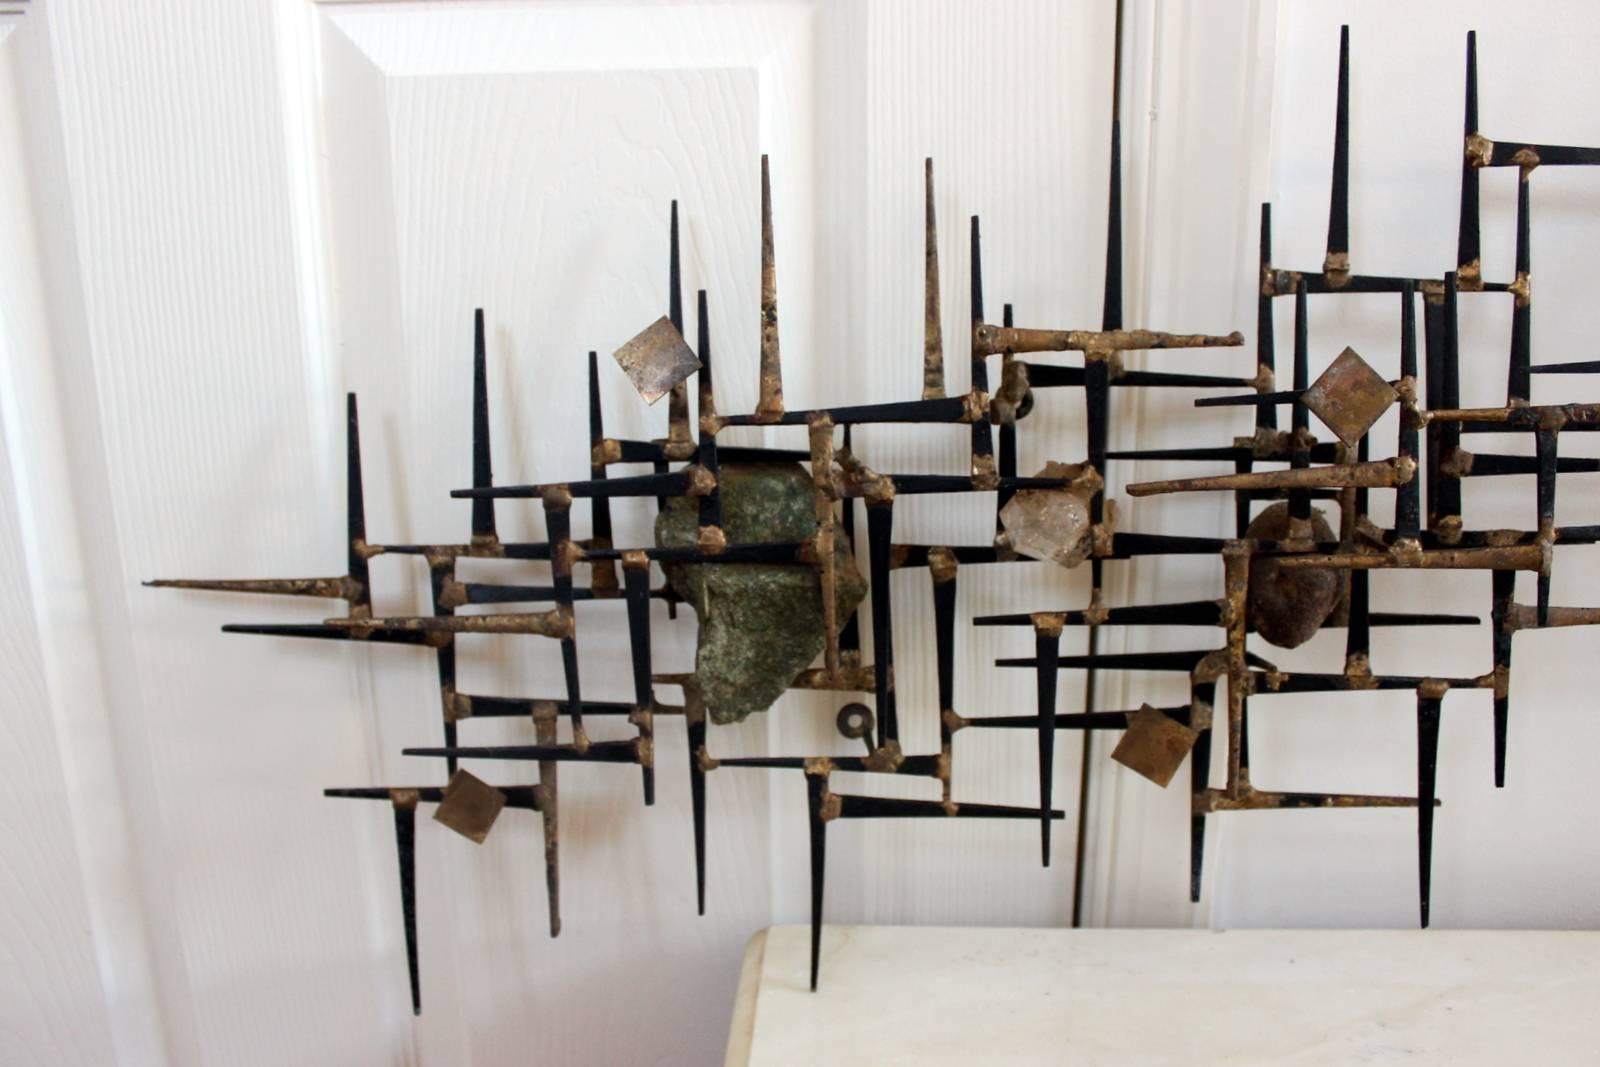 American Brutalist Abstract Wall Mount Sculpture with Quartz Pieces by Jim Gary